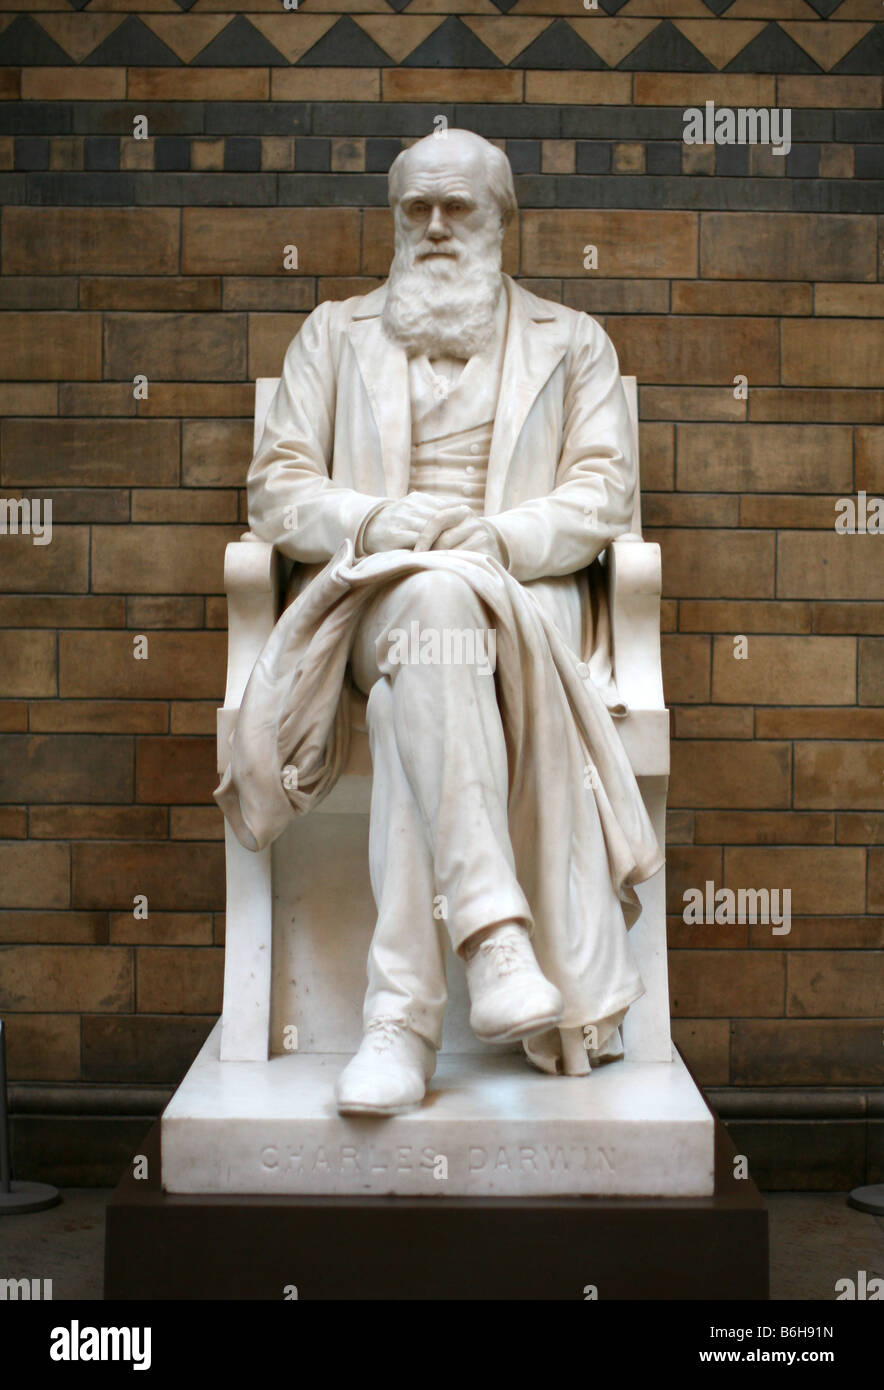 Sculpture of Charles Darwin in Natural History Museum, London Stock Photo